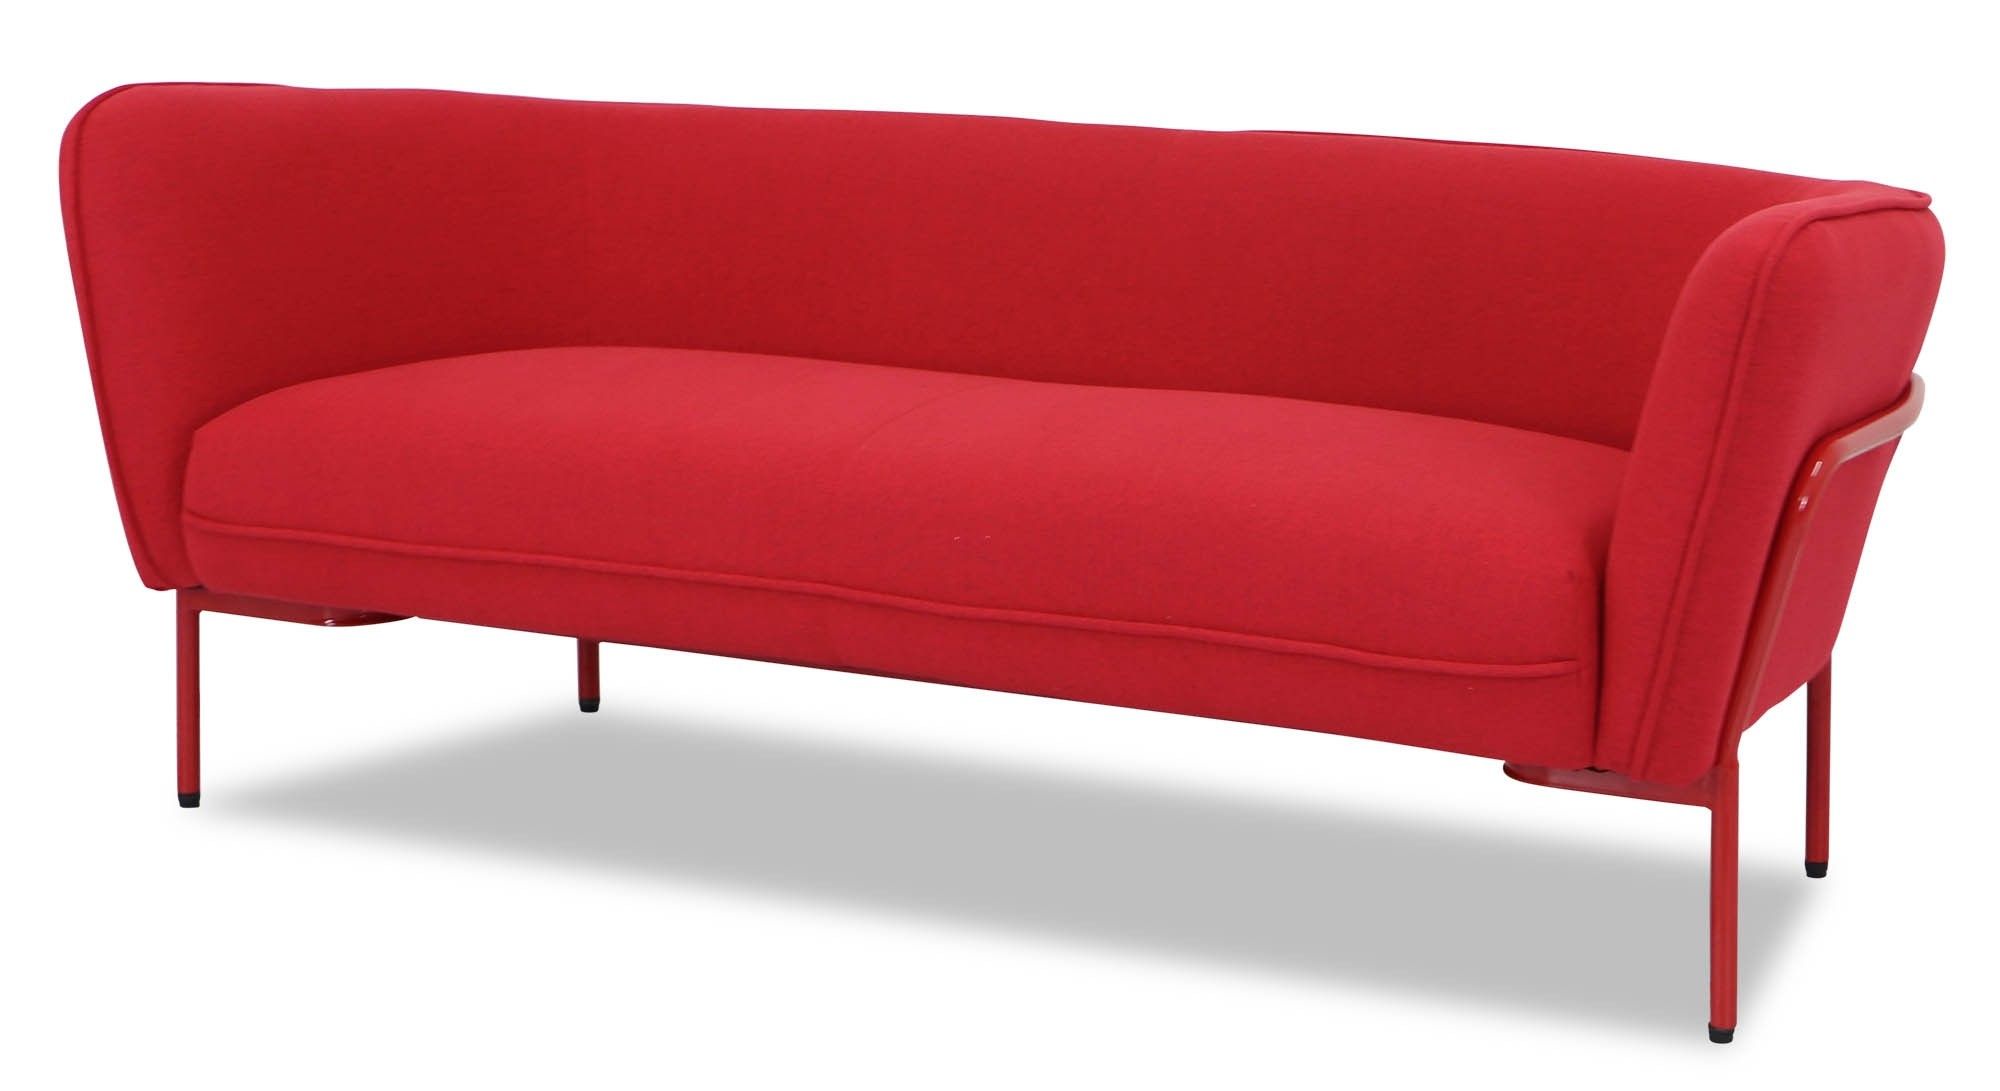 Karen Sofa In Ruby Red With Red Iron Stand | Furniture & Home Décor Within Karen Sofa Chairs (View 19 of 25)